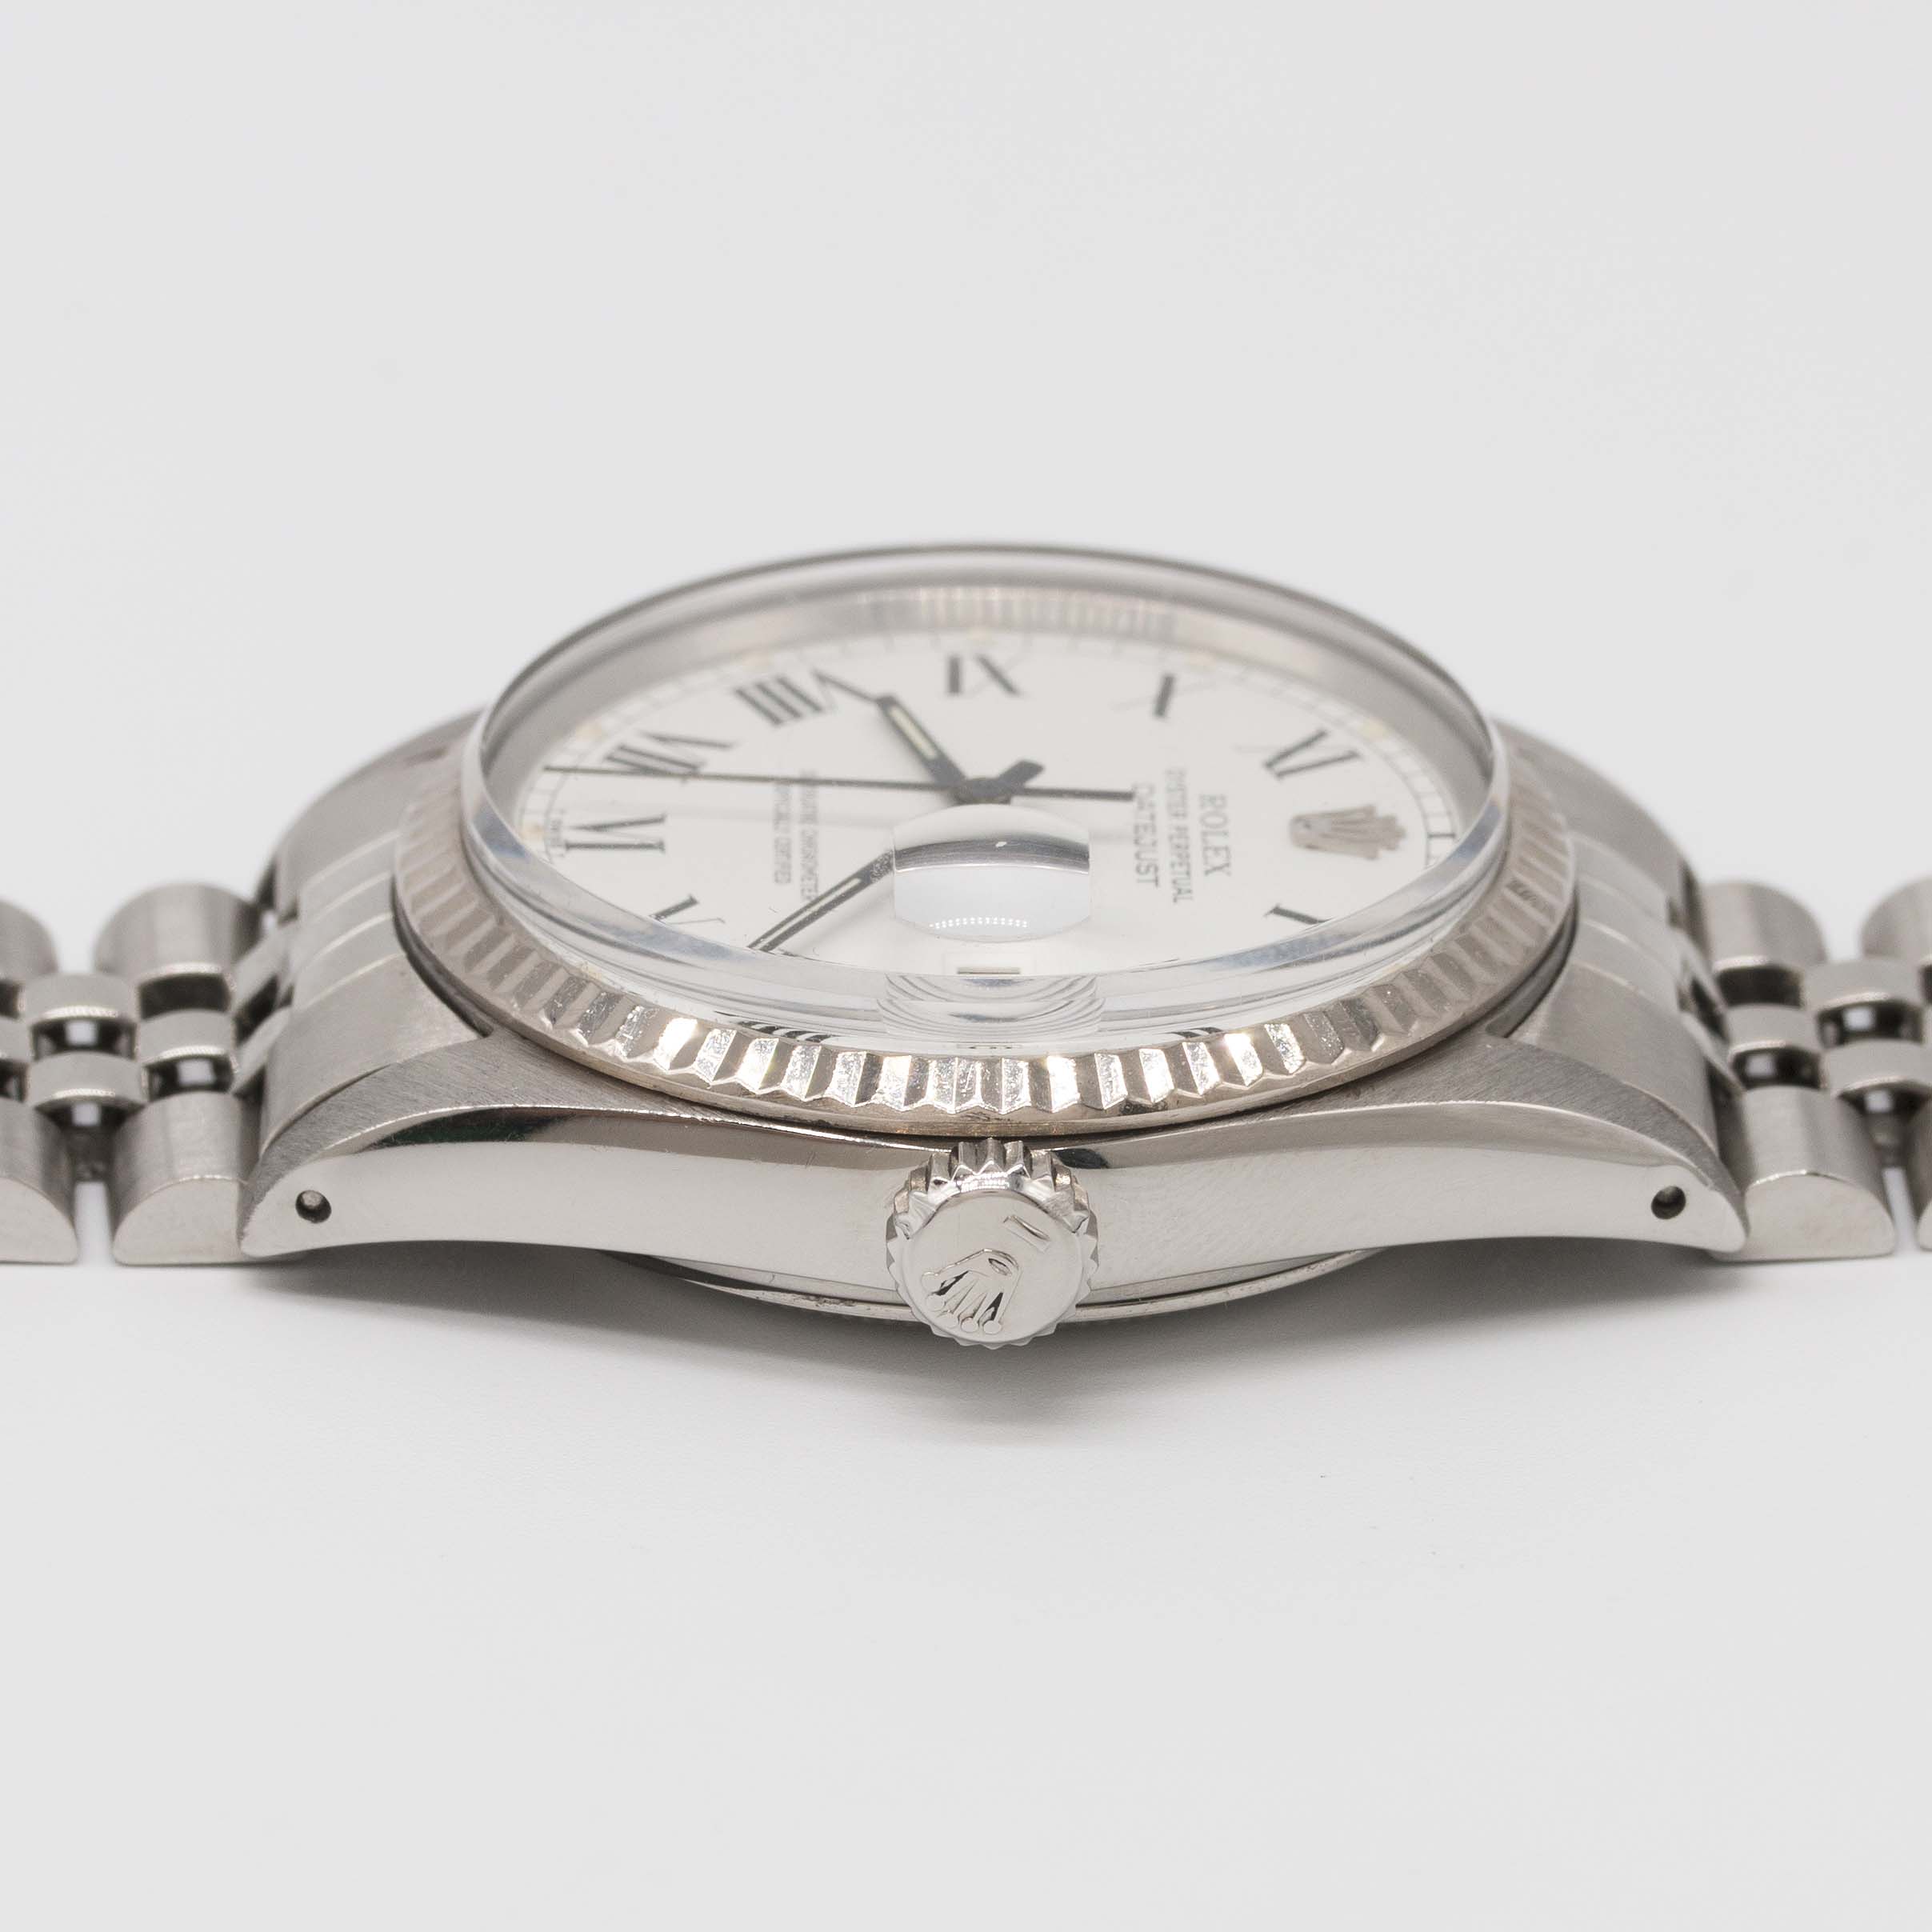 A GENTLEMAN'S STEEL & WHITE GOLD ROLEX OYSTER PERPETUAL DATEJUST BRACELET WATCH CIRCA 1984, REF. - Image 10 of 11